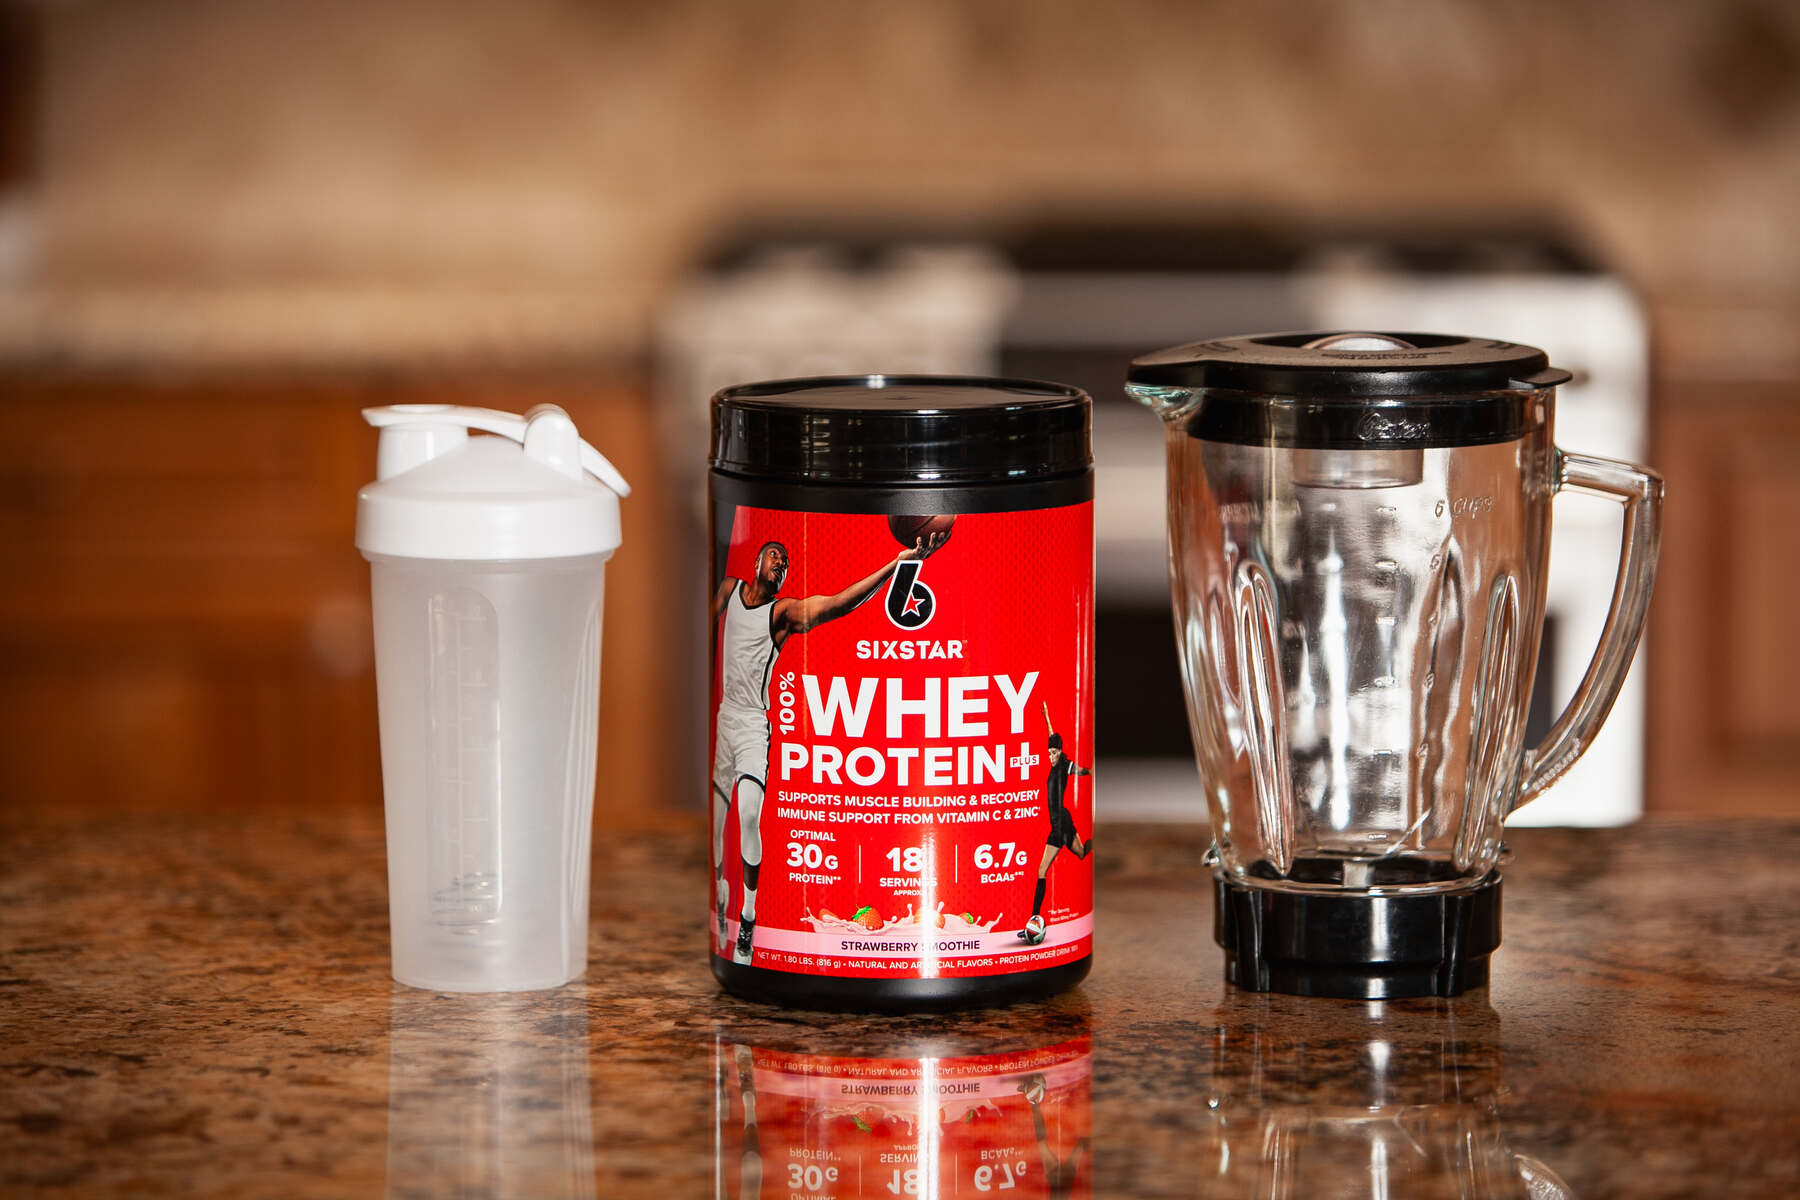 A protein powder jar, shaker bottle, and blender on a kitchen counter with wooden cabinets